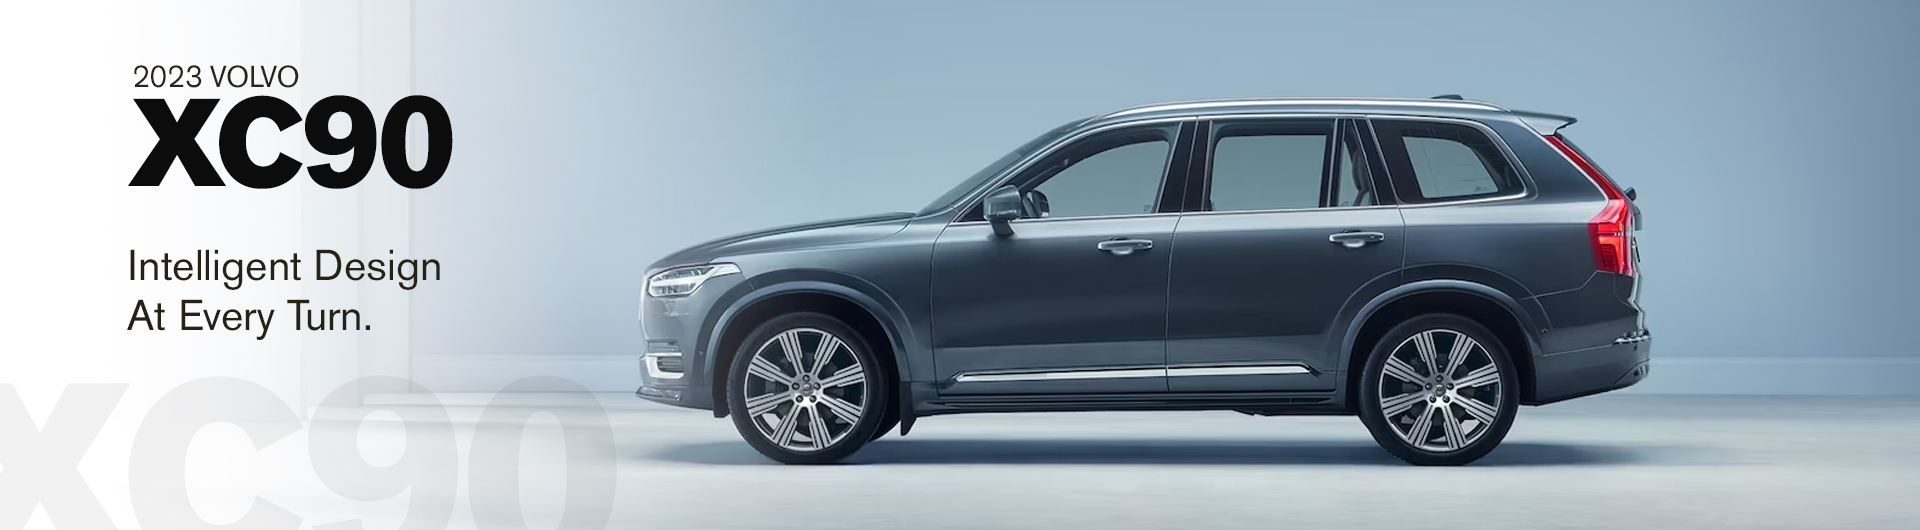 A New 2023 Volvo XC90 at Volvo Cars Hagerstown in Hagerstown, MD